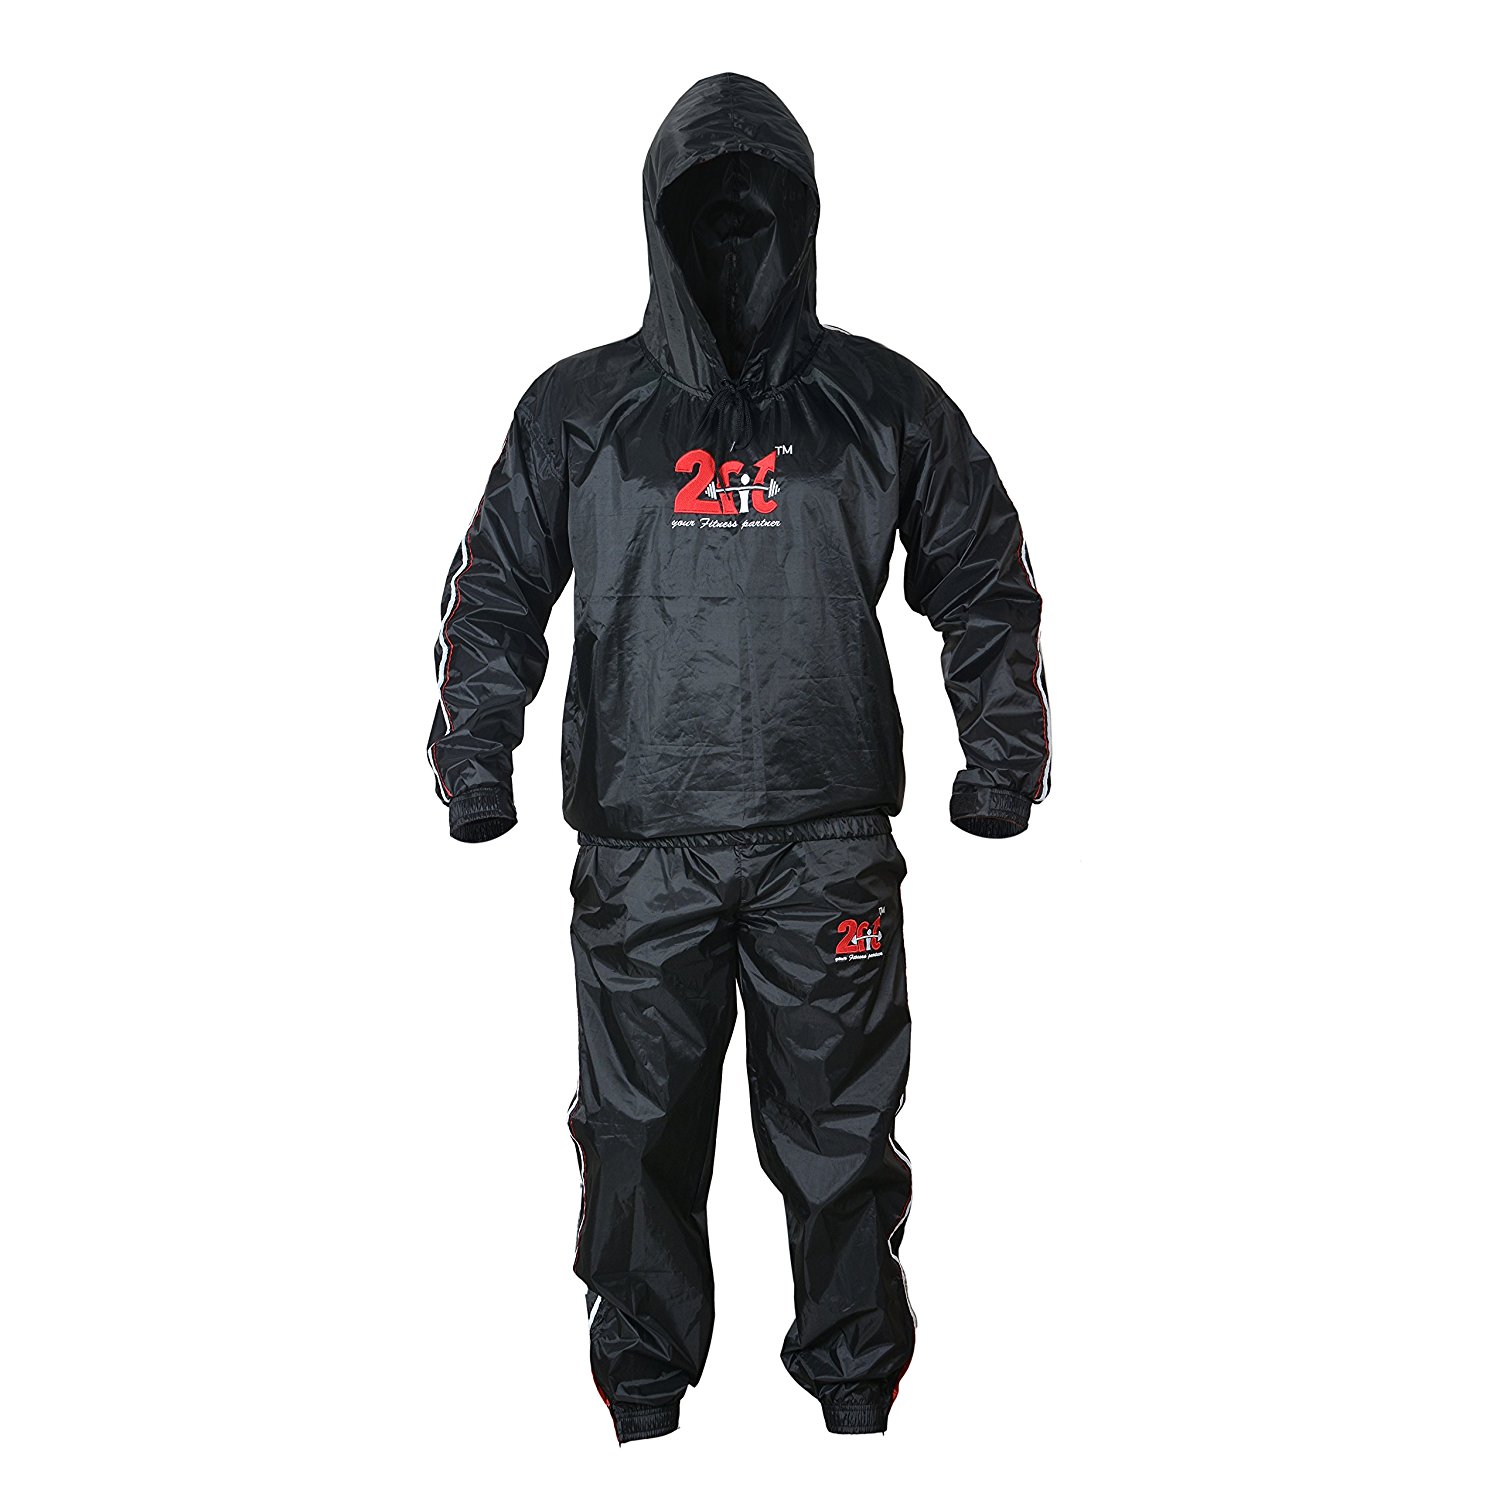 Best Sauna Suit for Making a Weight Cut - evolved MMA